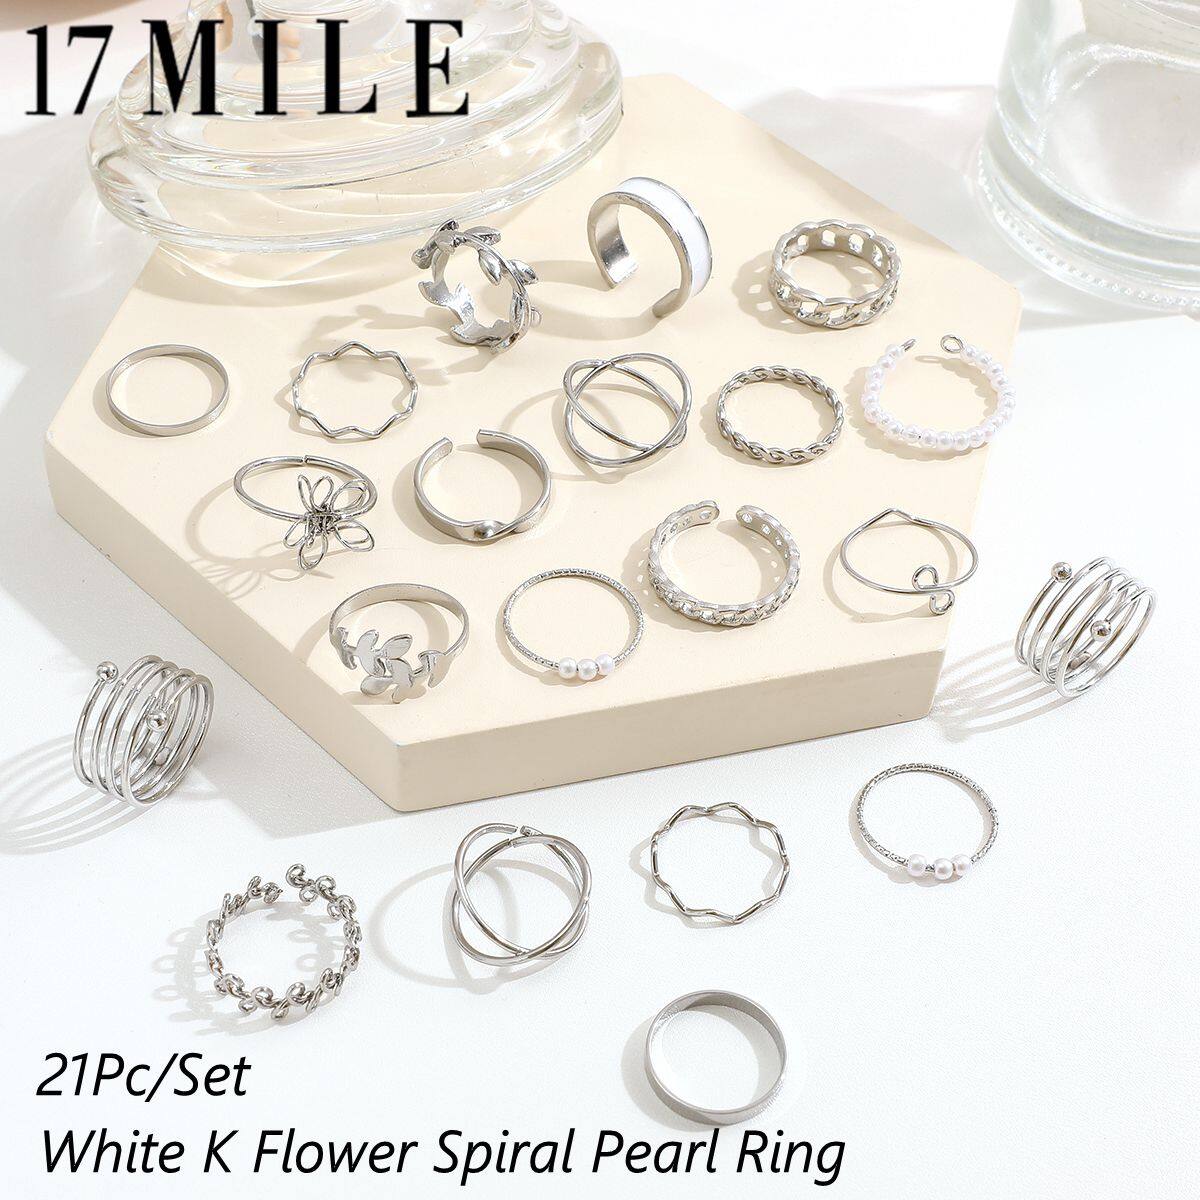 17 MILE 21Pc Set White K Flower Spiral Pearl Ring for Women Accessories